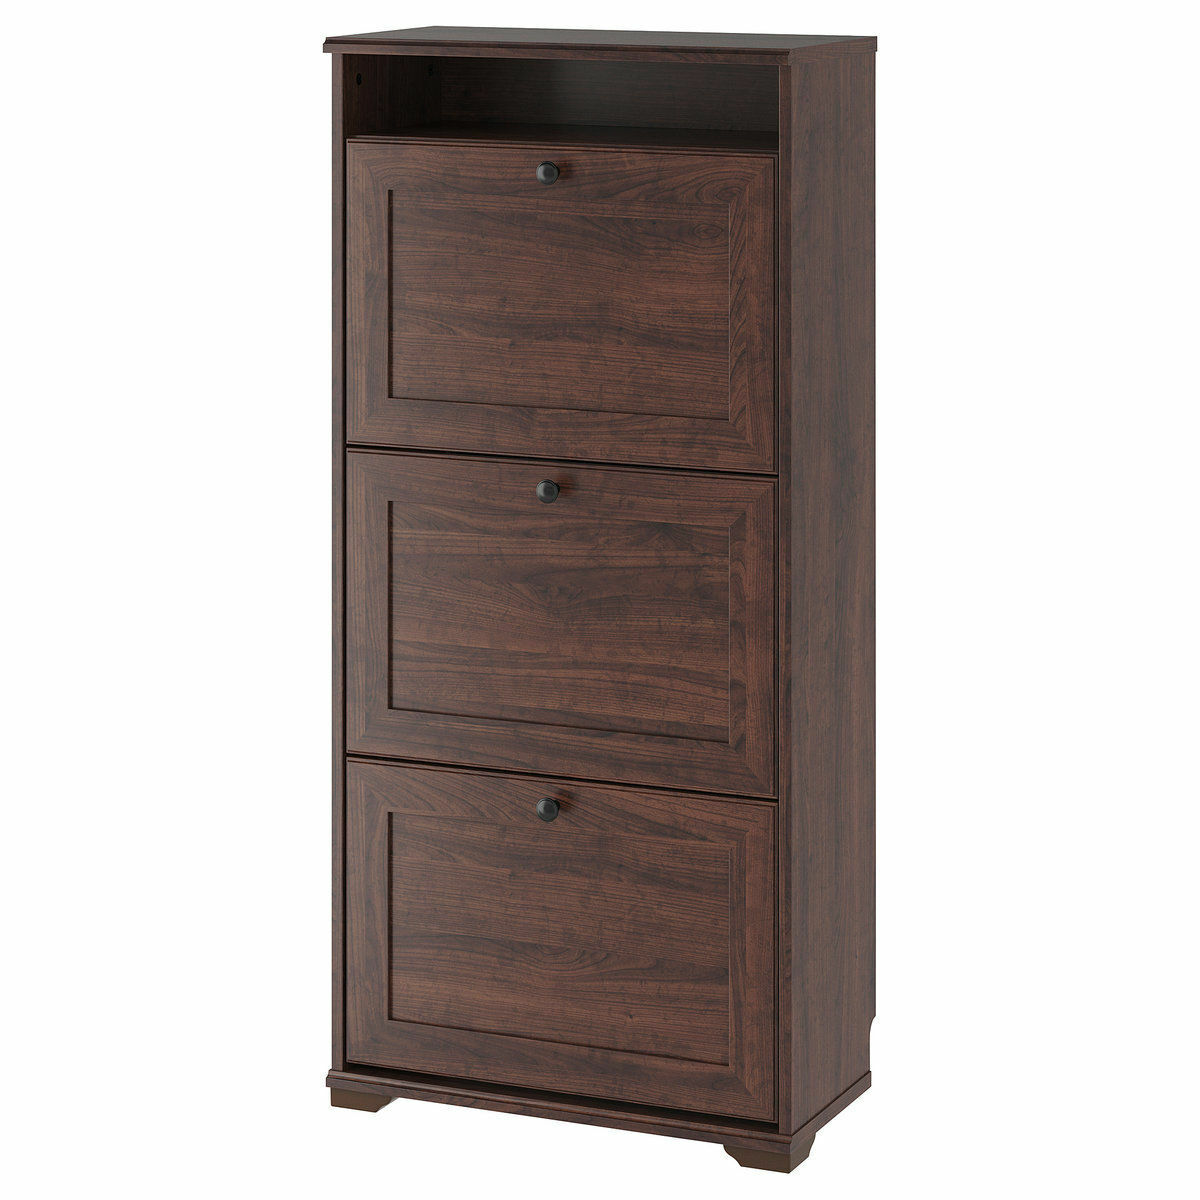 Ikea Brusali Shoe Cabinet With 3 Compartments Brown